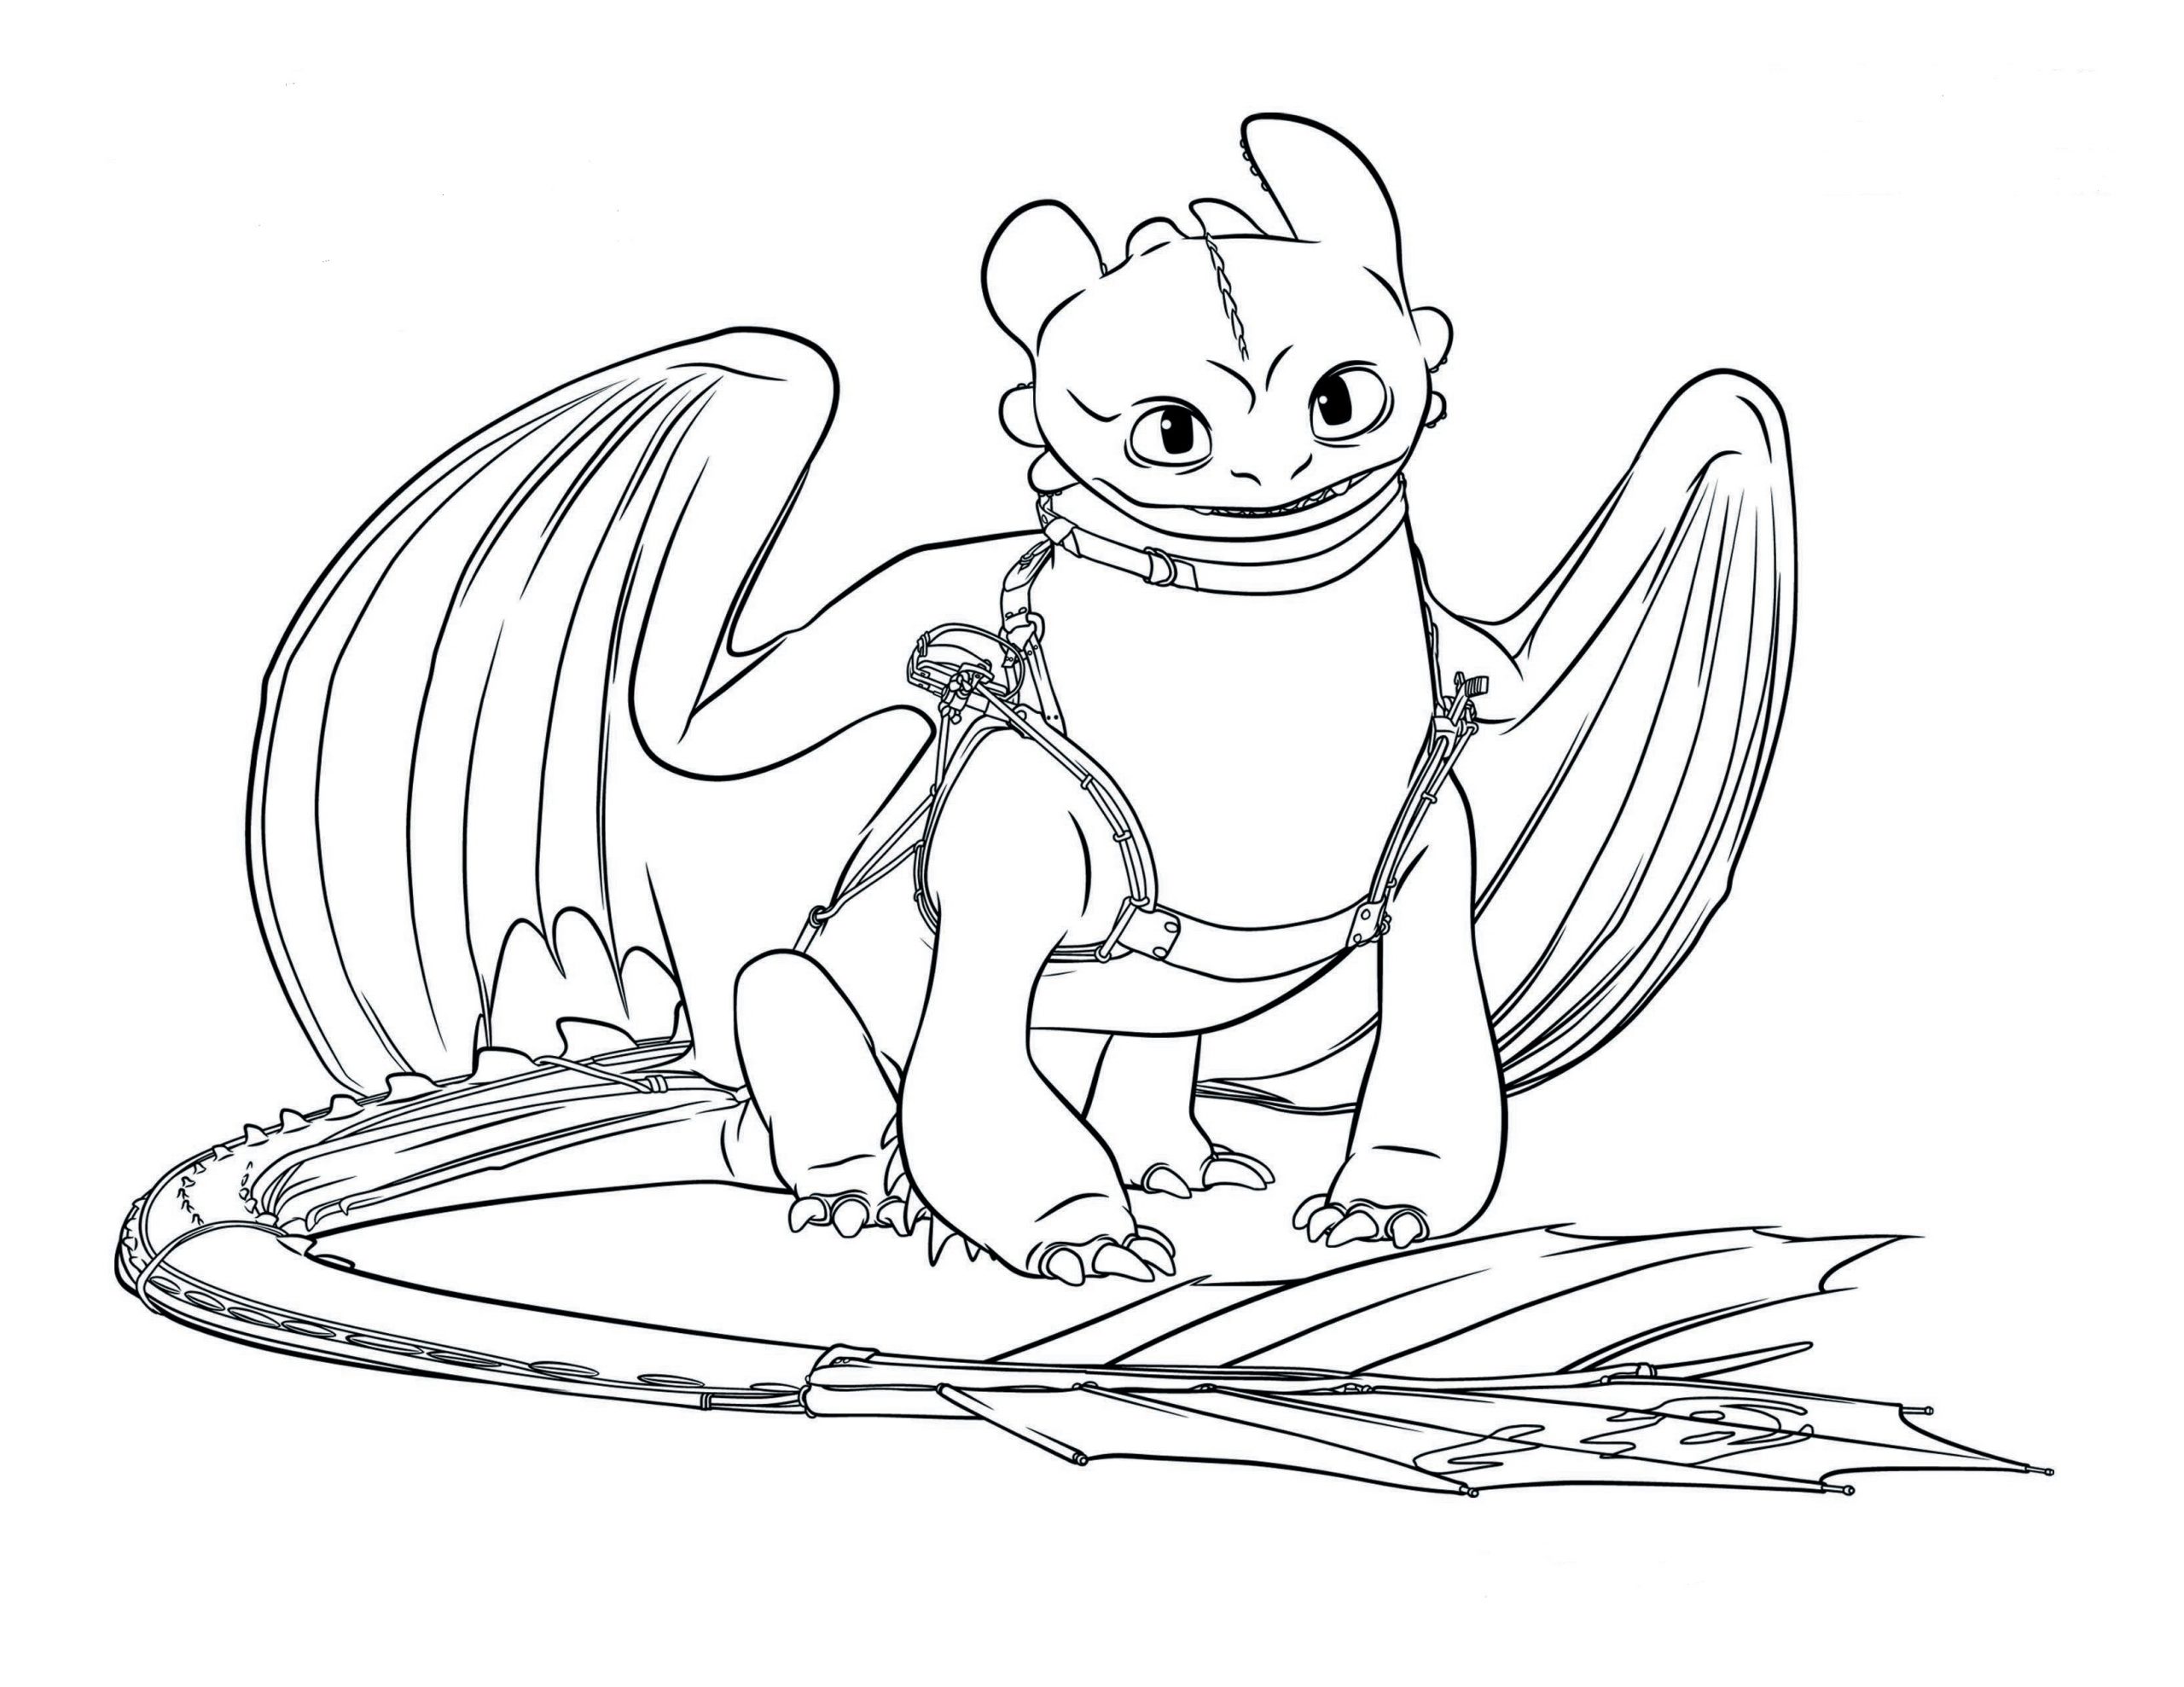 Toothless dragon coloring book